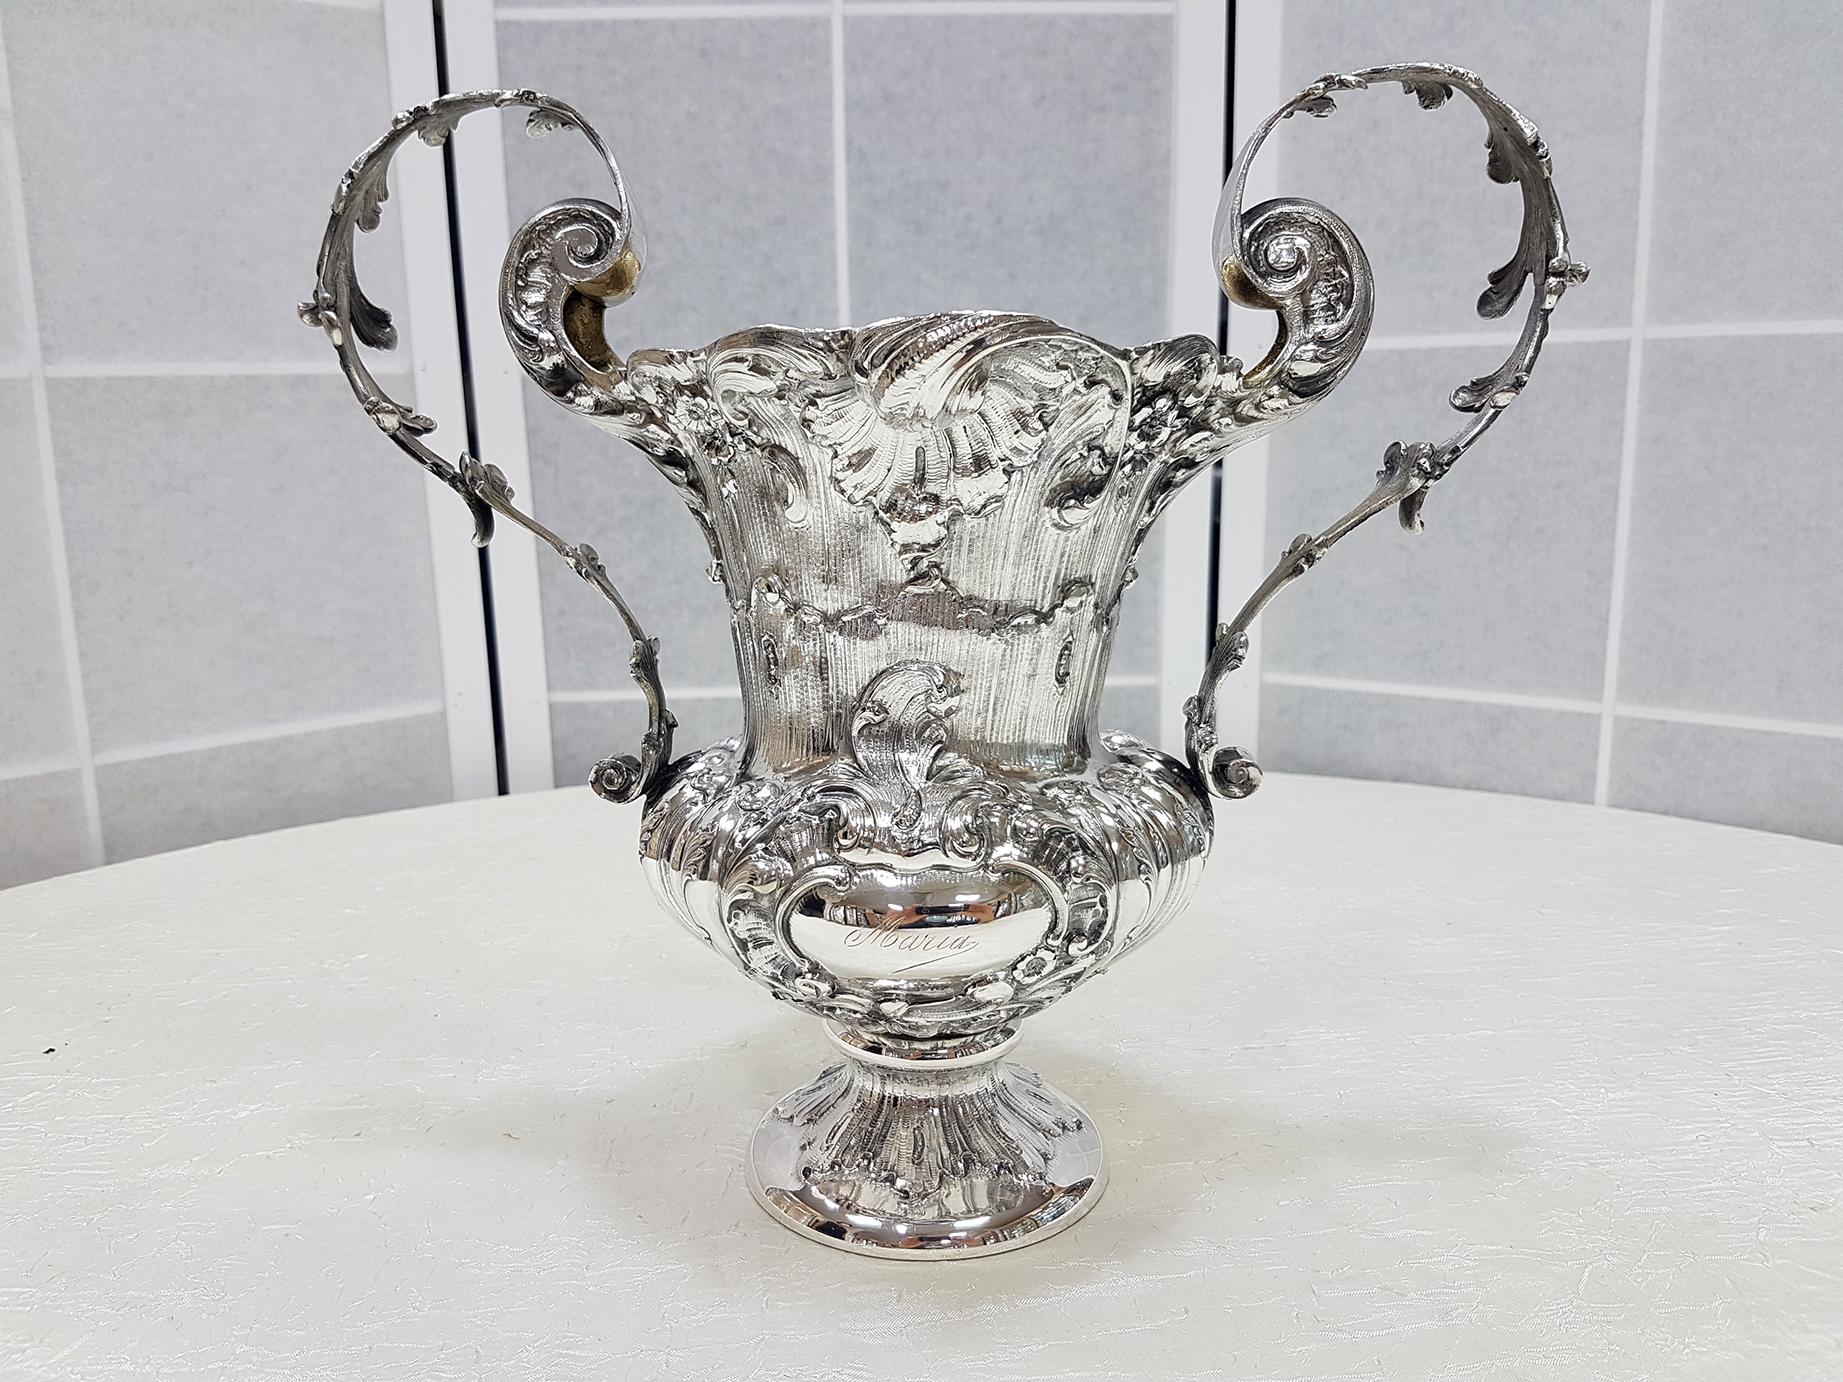 19th Century Italian Silver Vase Barocco Style with Handles and Gilded Inside For Sale 9